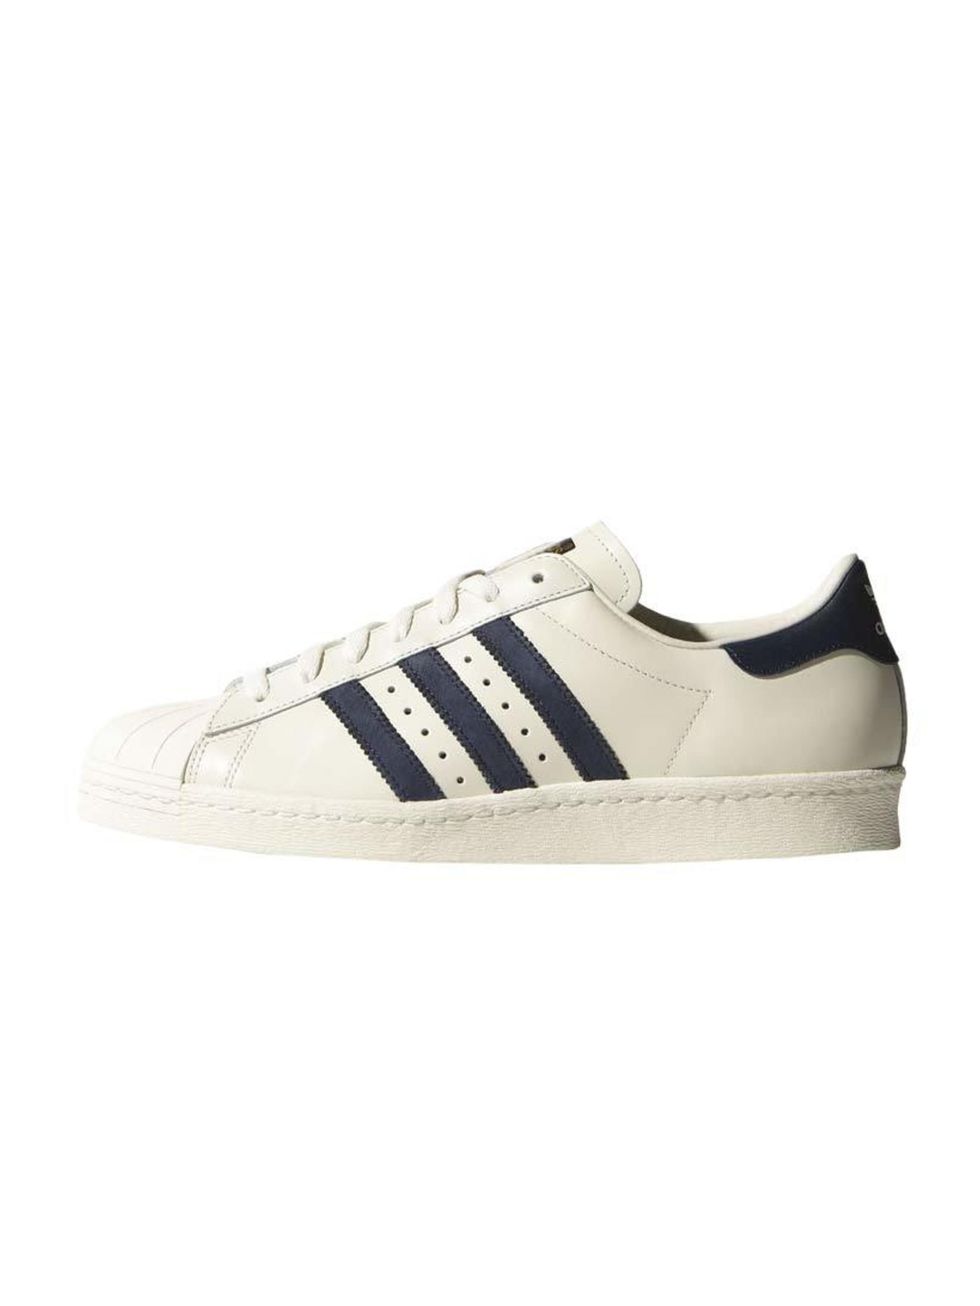 <p>Last year, it was the Stan Smith. This year? Meet the Superstar - you're going to be seeing a lot of this beauty.</p>

<p><a href="http://www.adidas.co.uk/superstar-80s-vintage-deluxe-shoes/B25964_530.html" target="_blank">Adidas</a> trainers, £85</p>